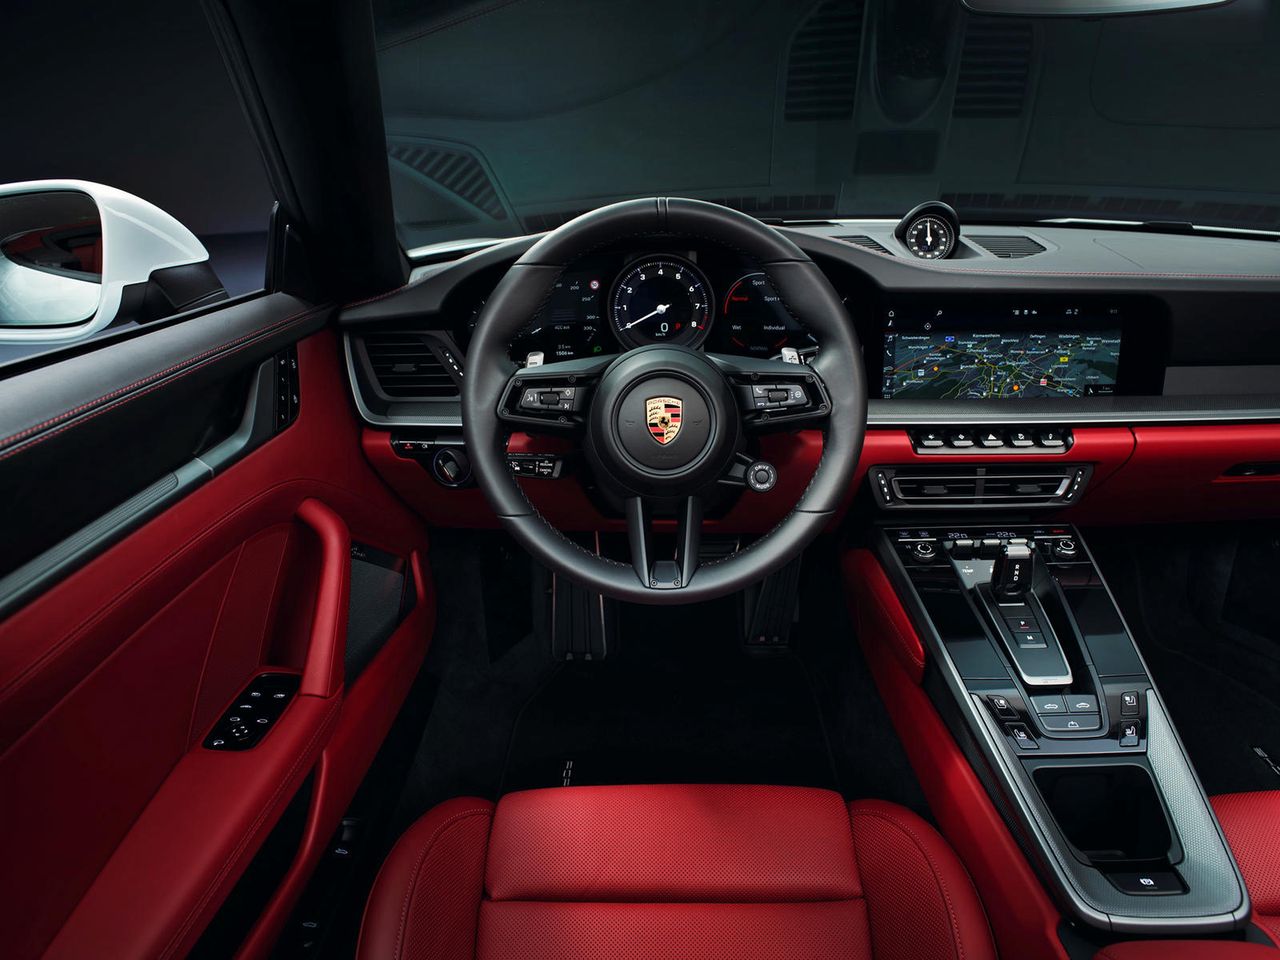 Driving into the future. Porsche partners with Google